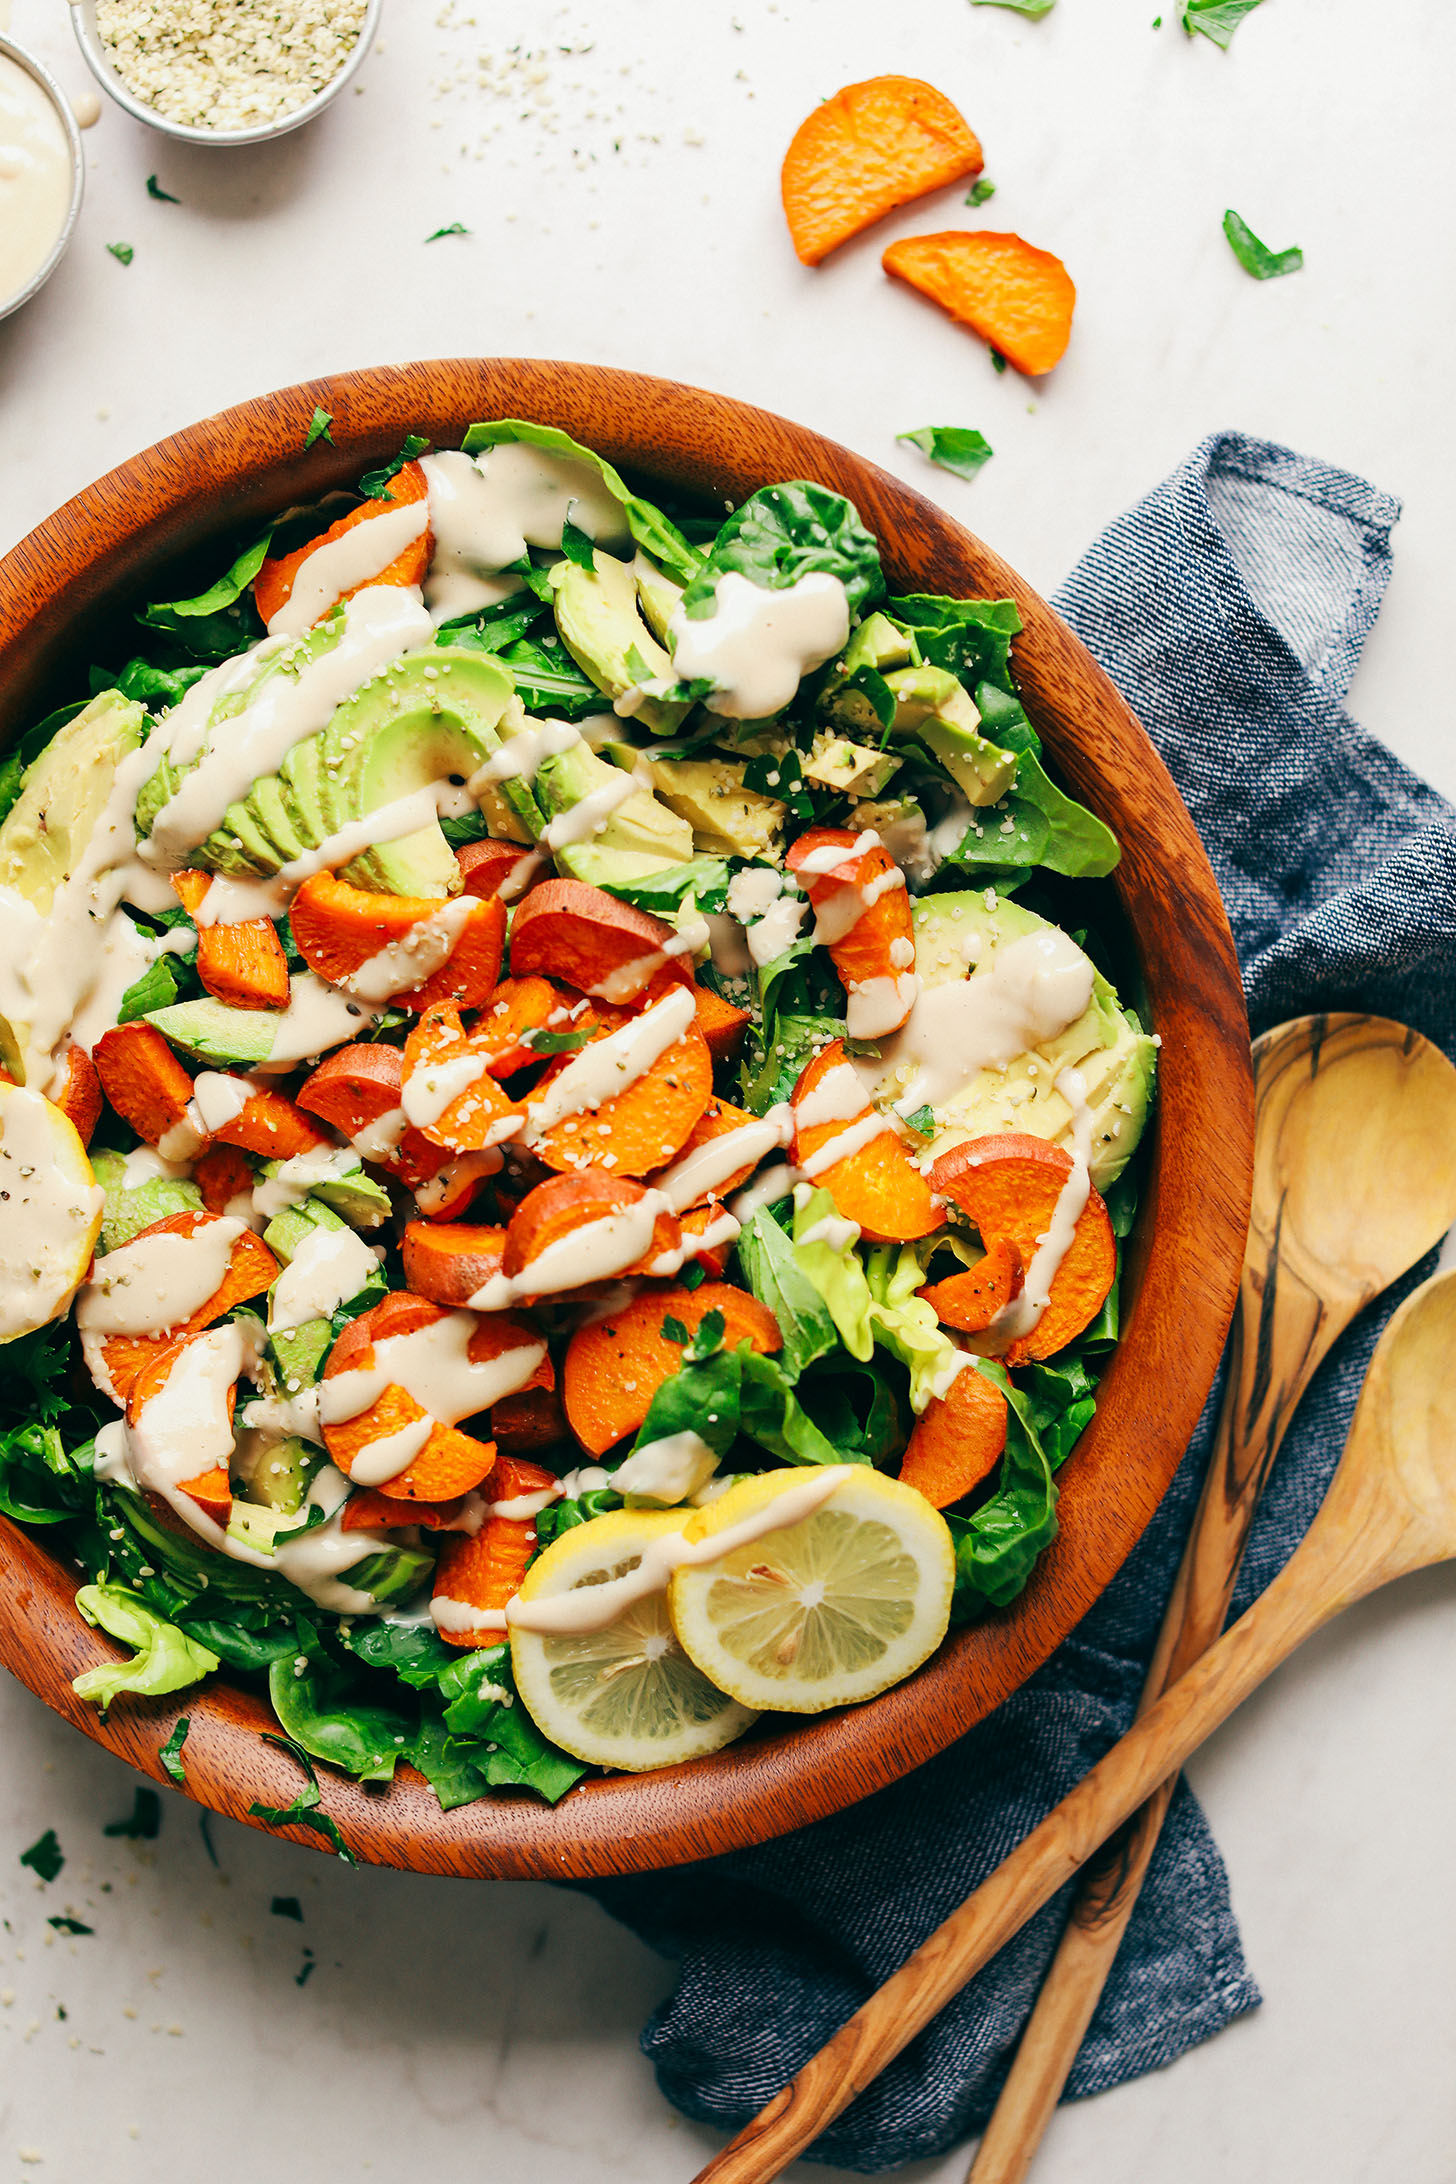 Healthy plant-based Green Salad with Sweet Potatoes, Avocado, and Tahini Dressing